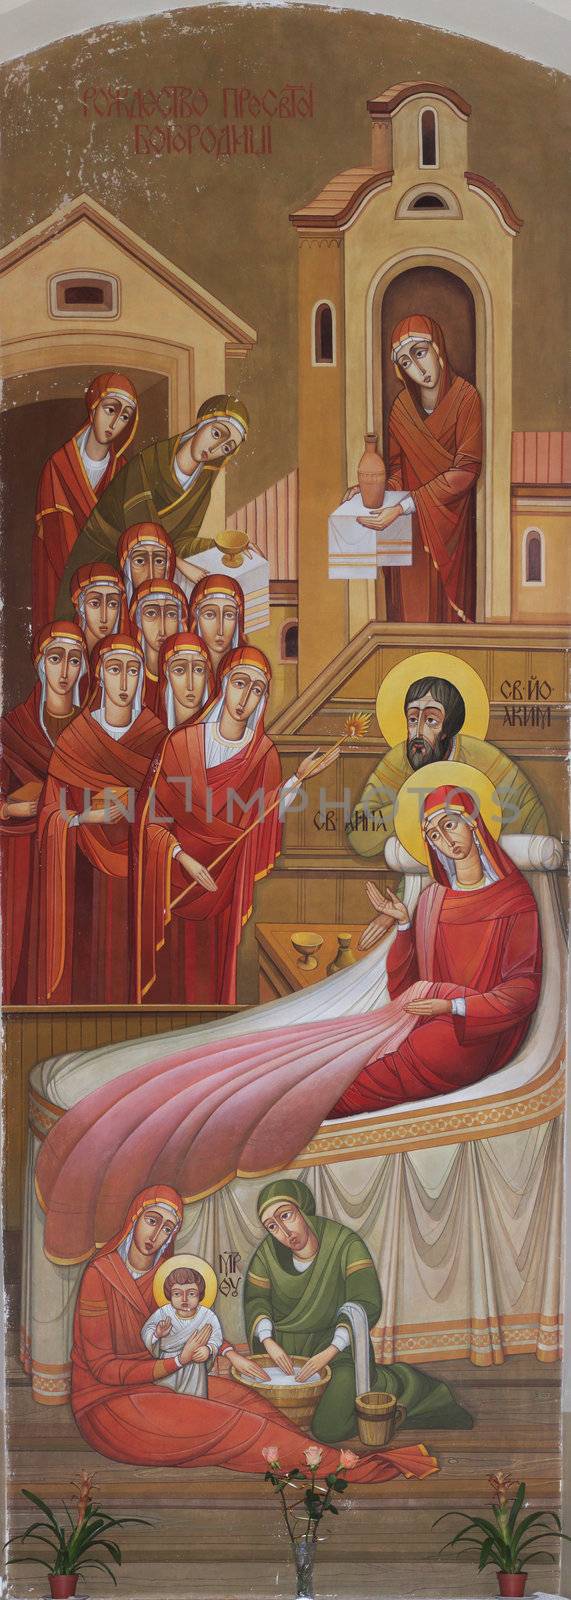 Nativity of the Theotokos by chihirophotos